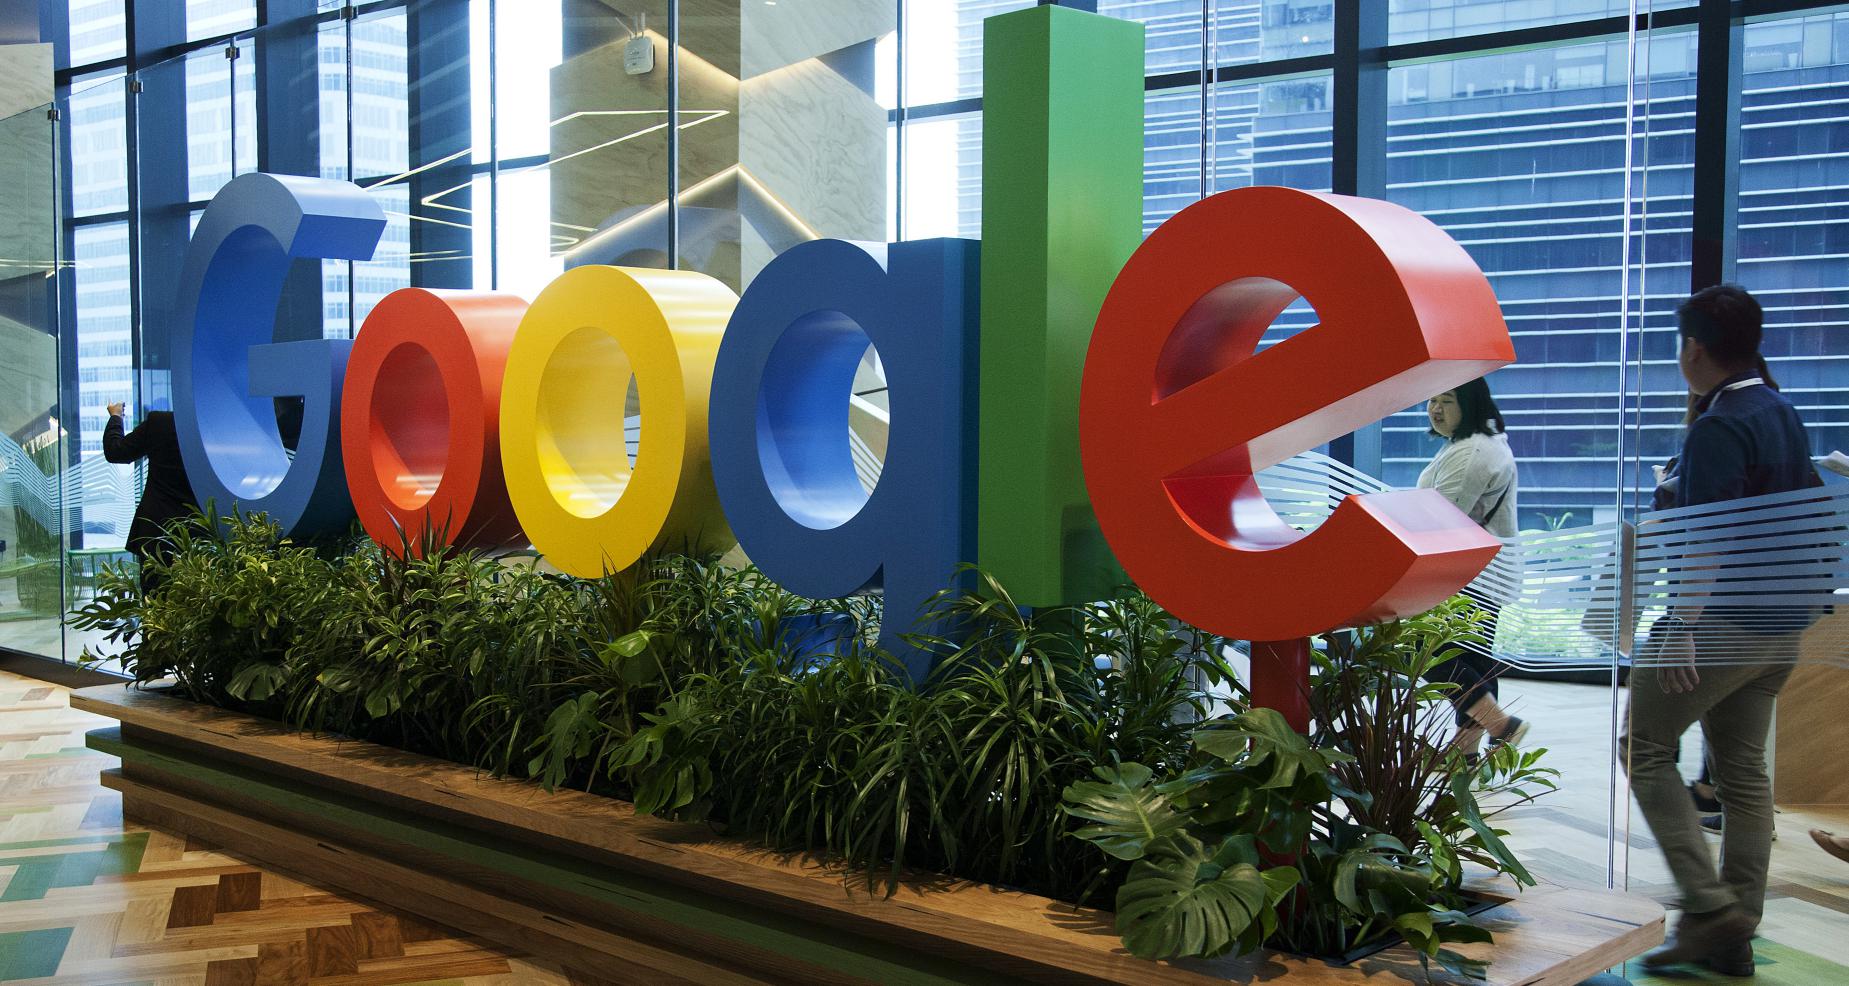 Google office receives threat call